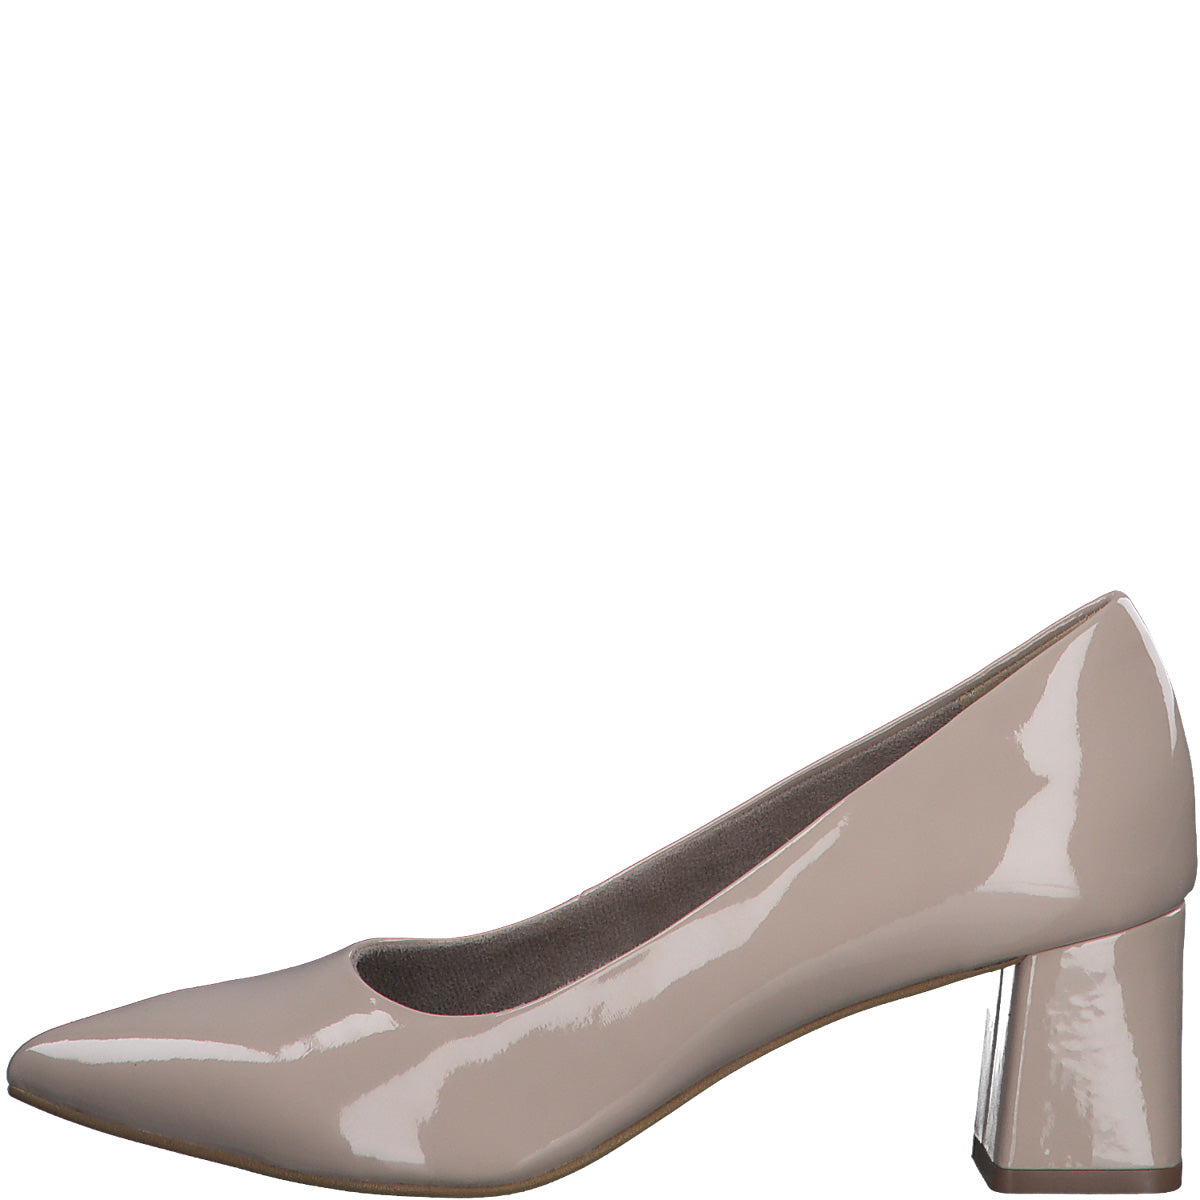 Pointed Toe Heel in Nude Patent